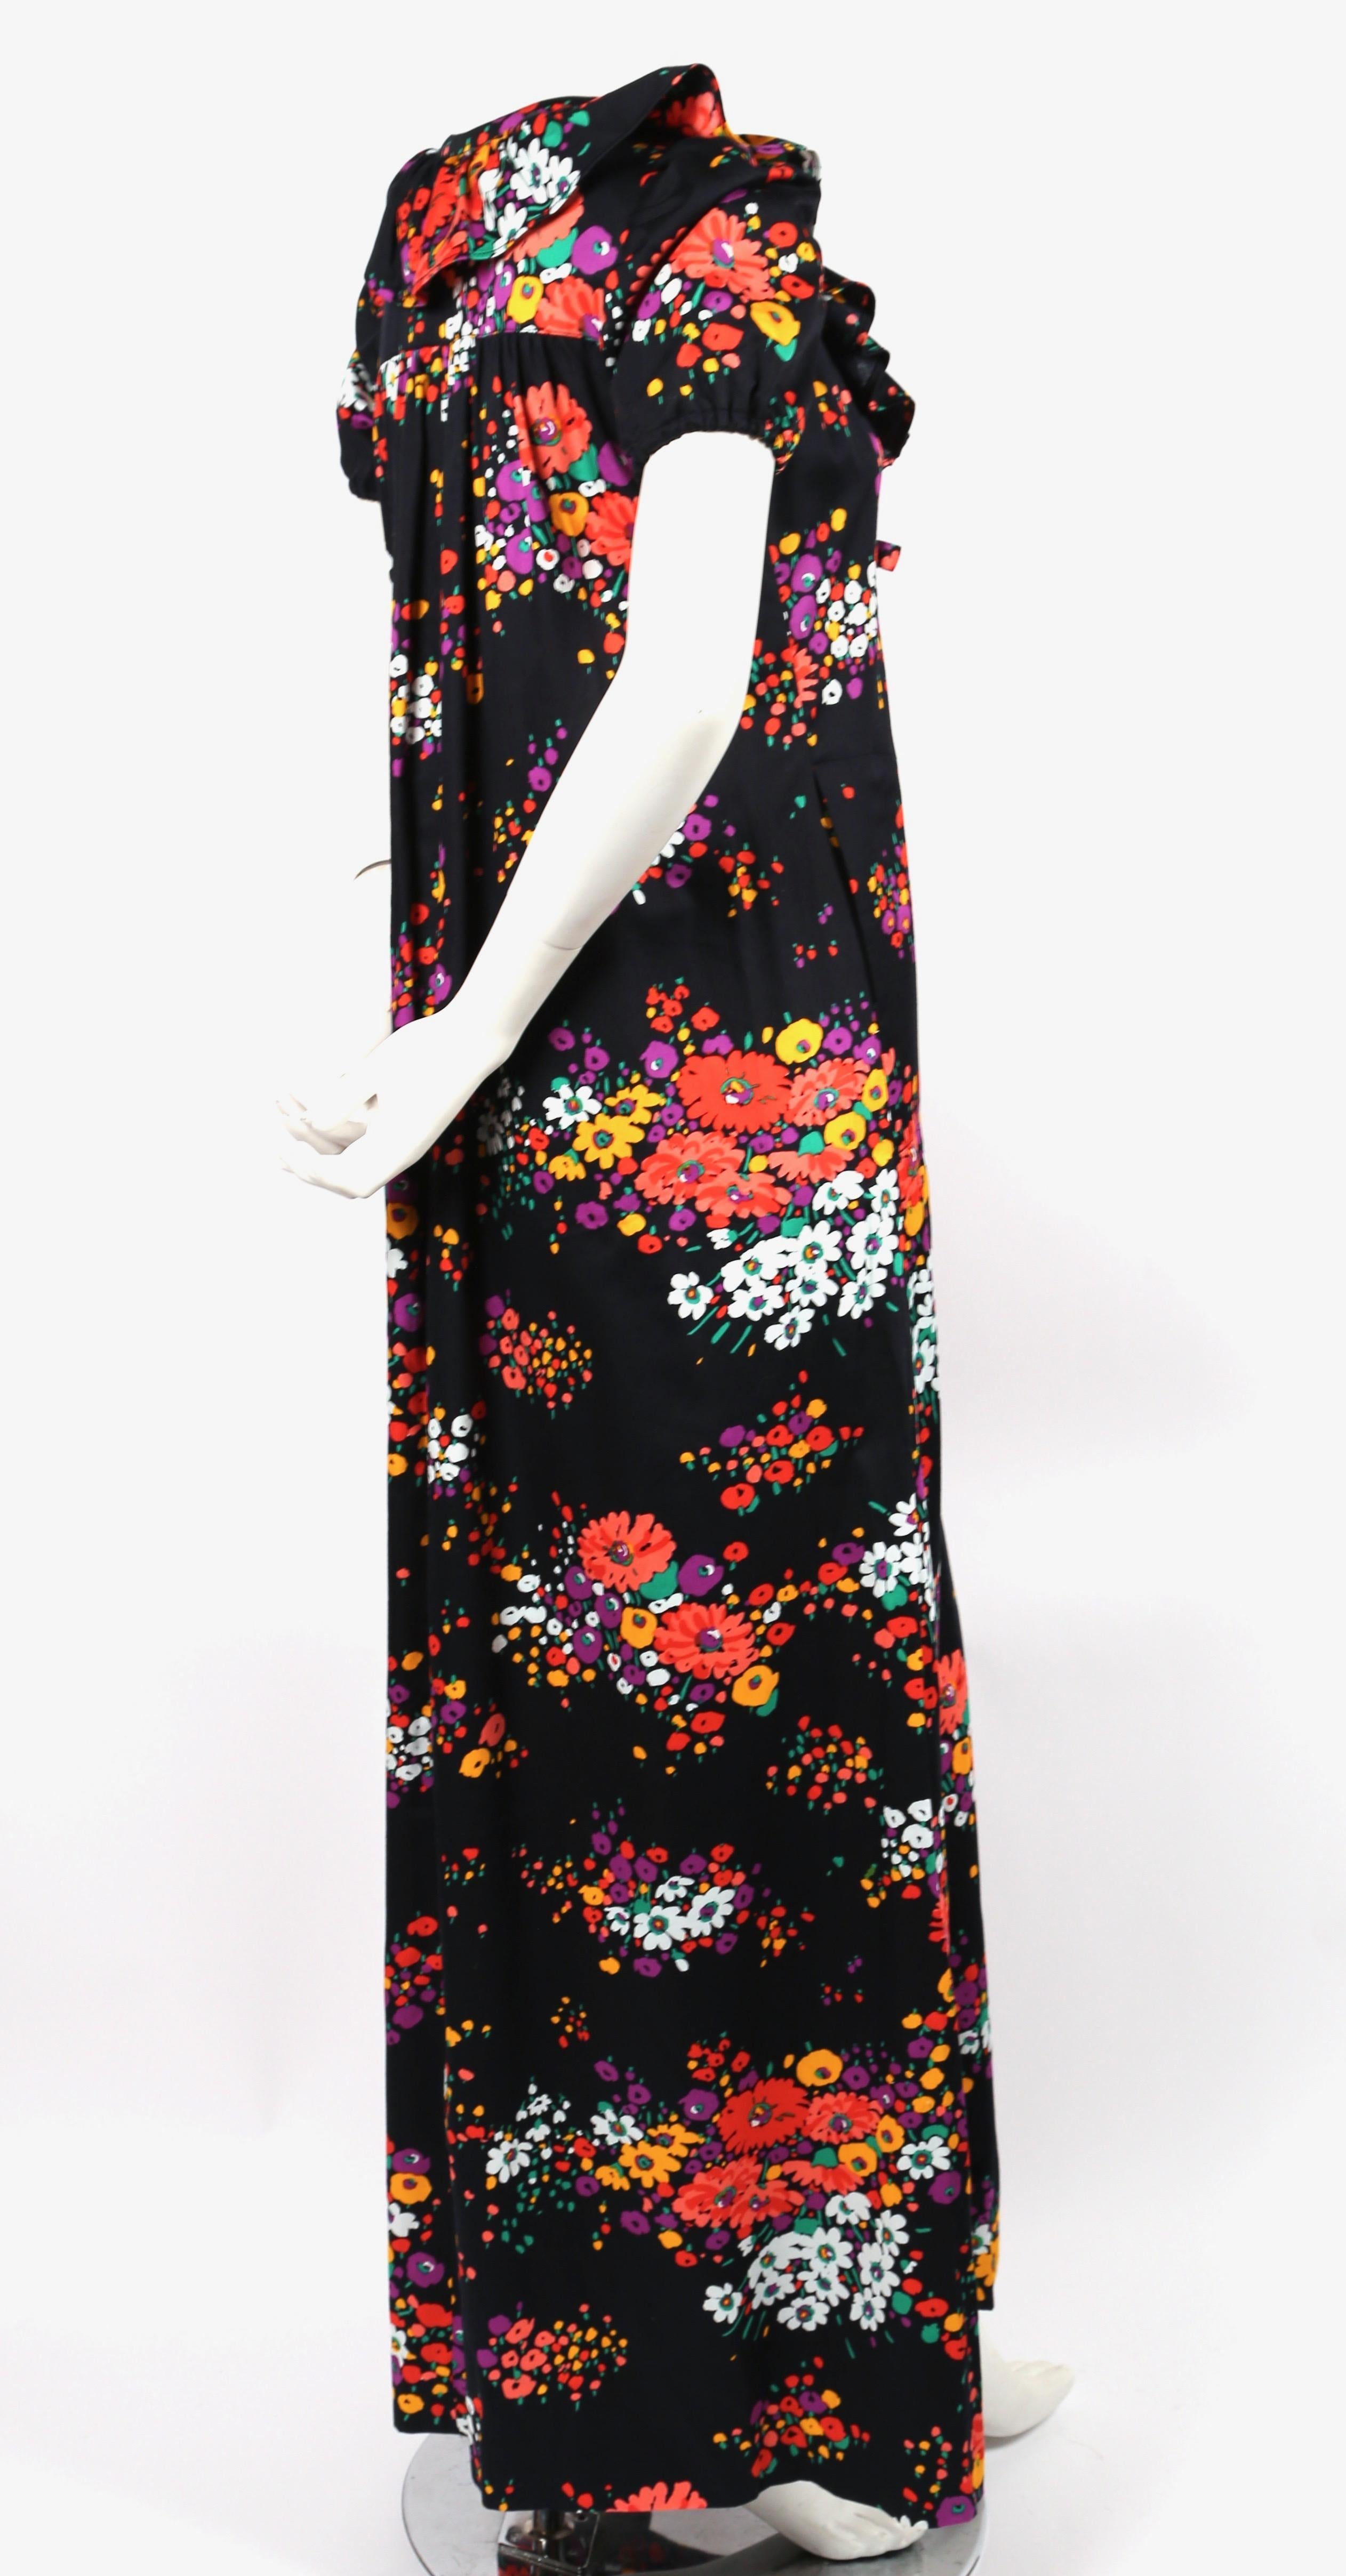 Black, floral-printed, cotton gown with flounce detail and long tie designed by Yves Saint Laurent for Saint Laurent rive gauche dating to 1974 exactly as featured in the Saint Laurent ad campaign as photographed by Jean Jacques Bugat. French size